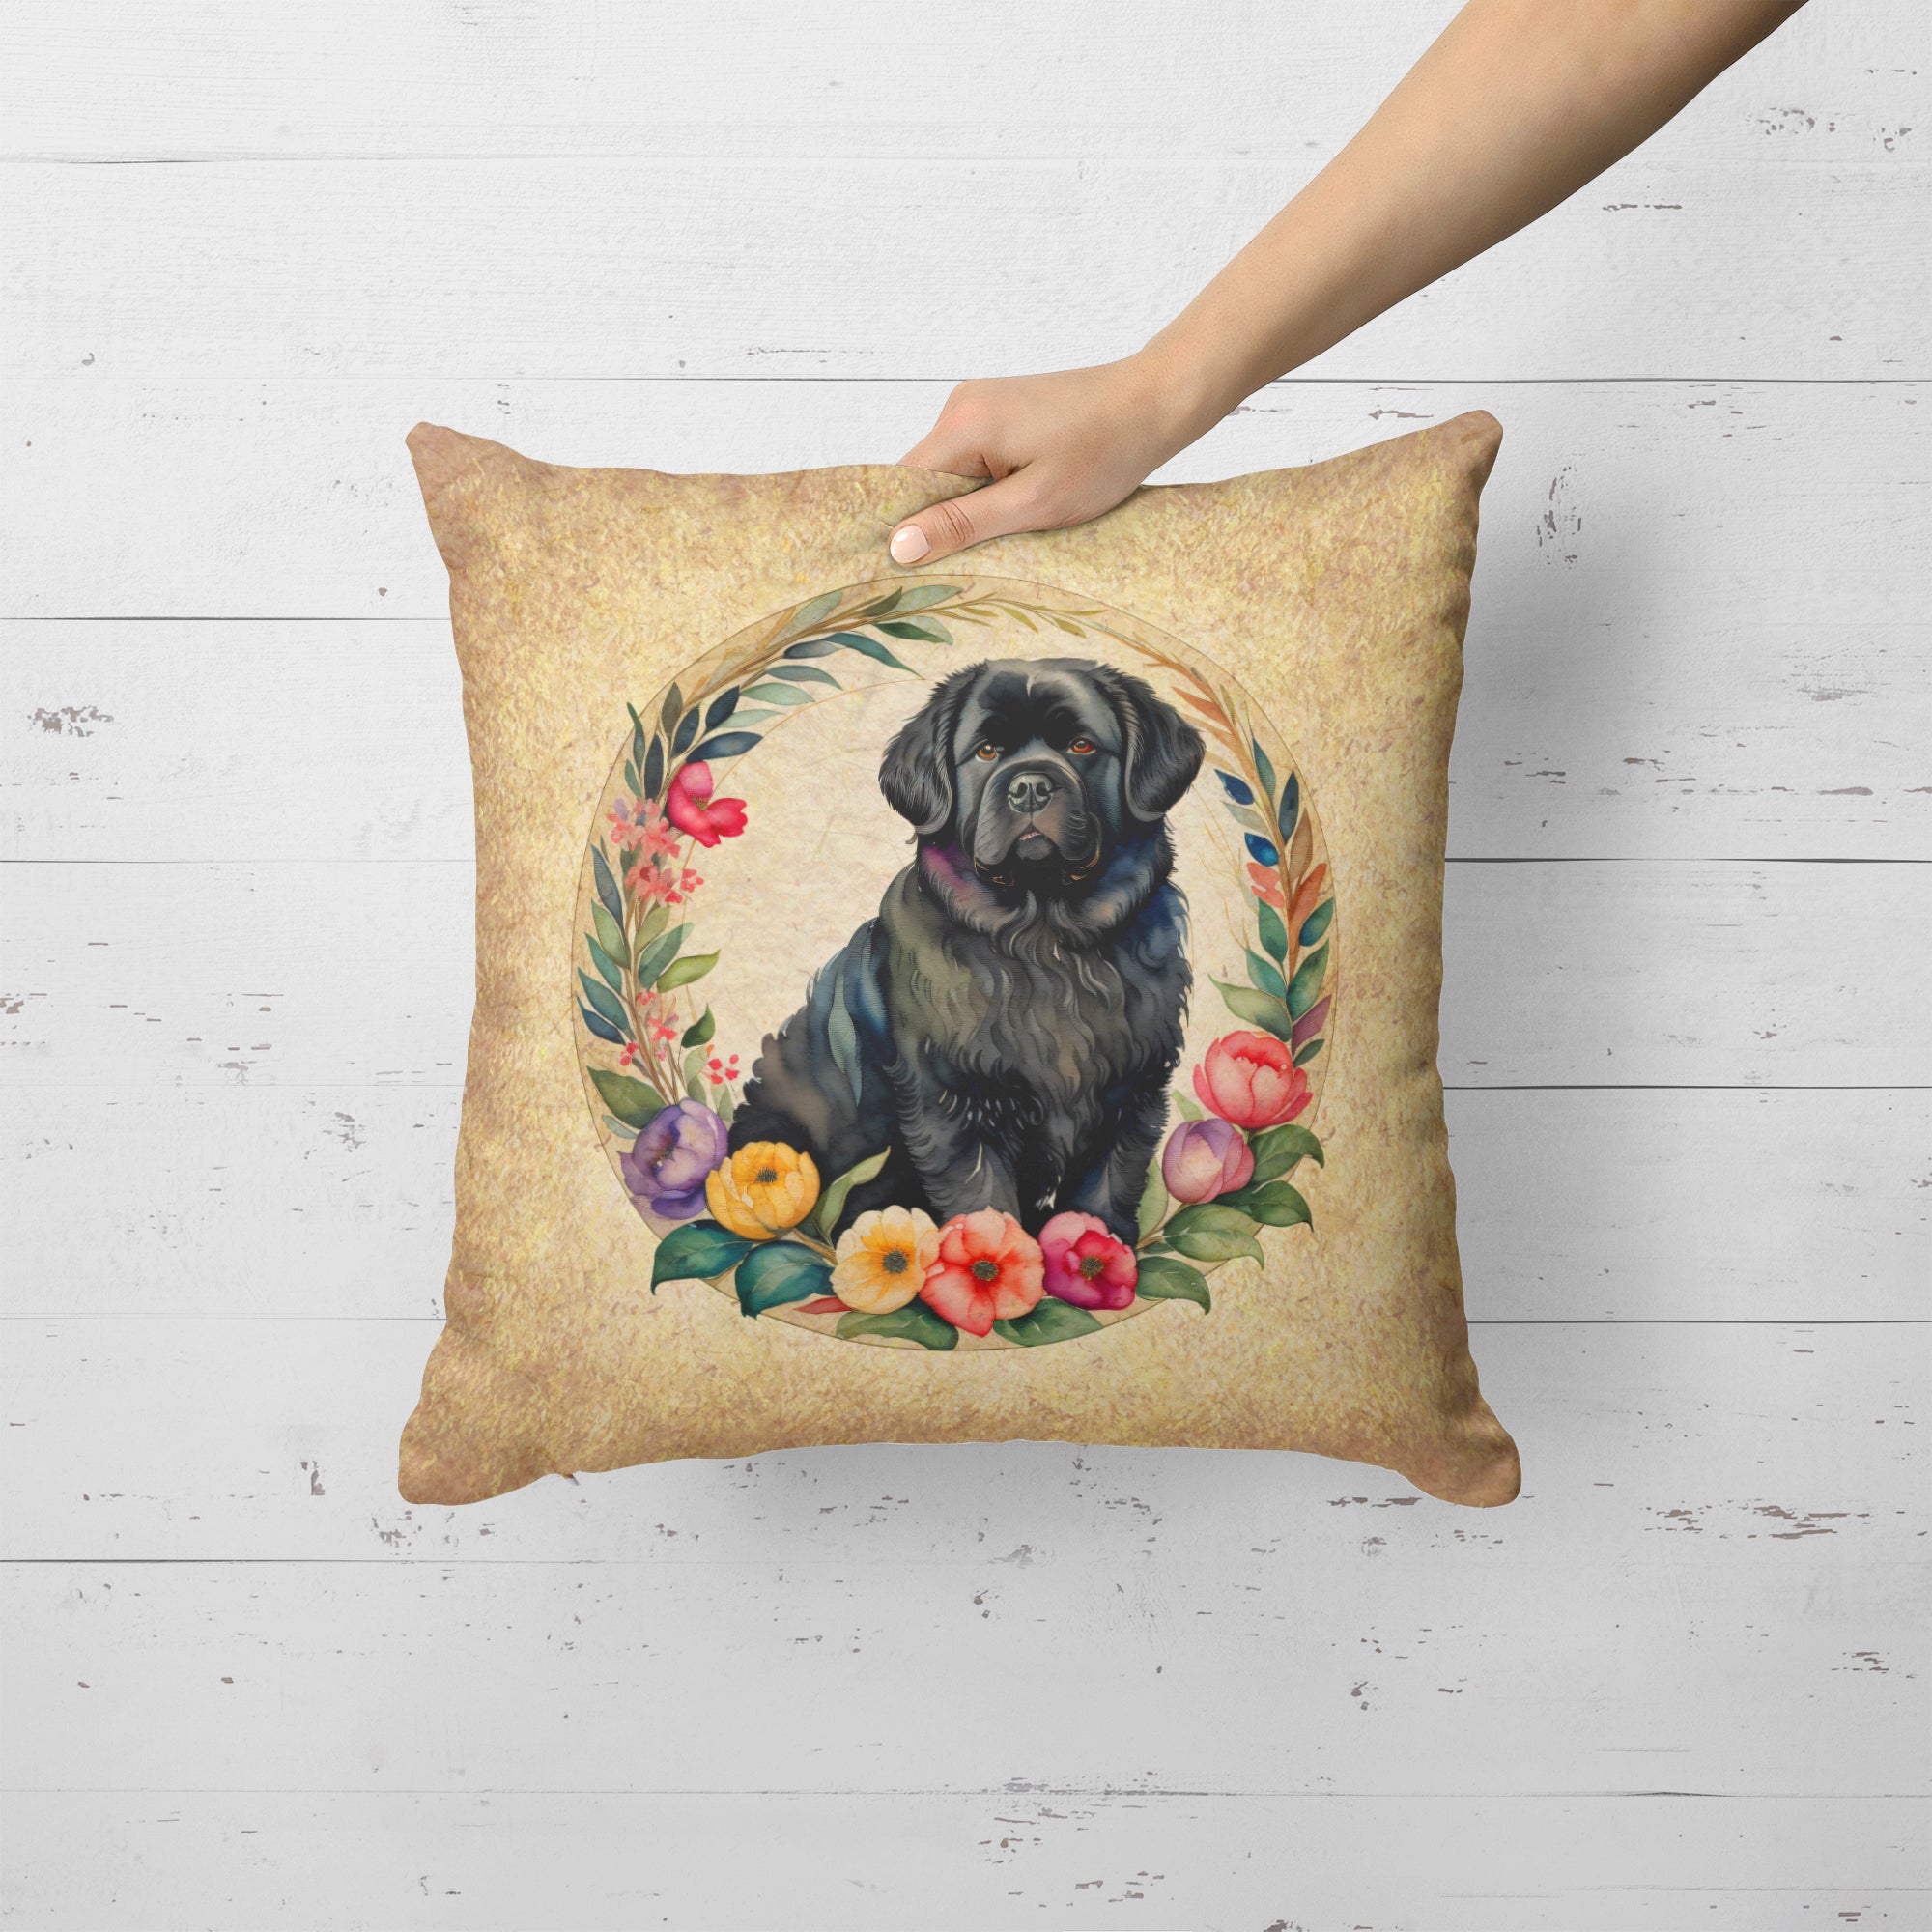 Buy this Newfoundland and Flowers Fabric Decorative Pillow